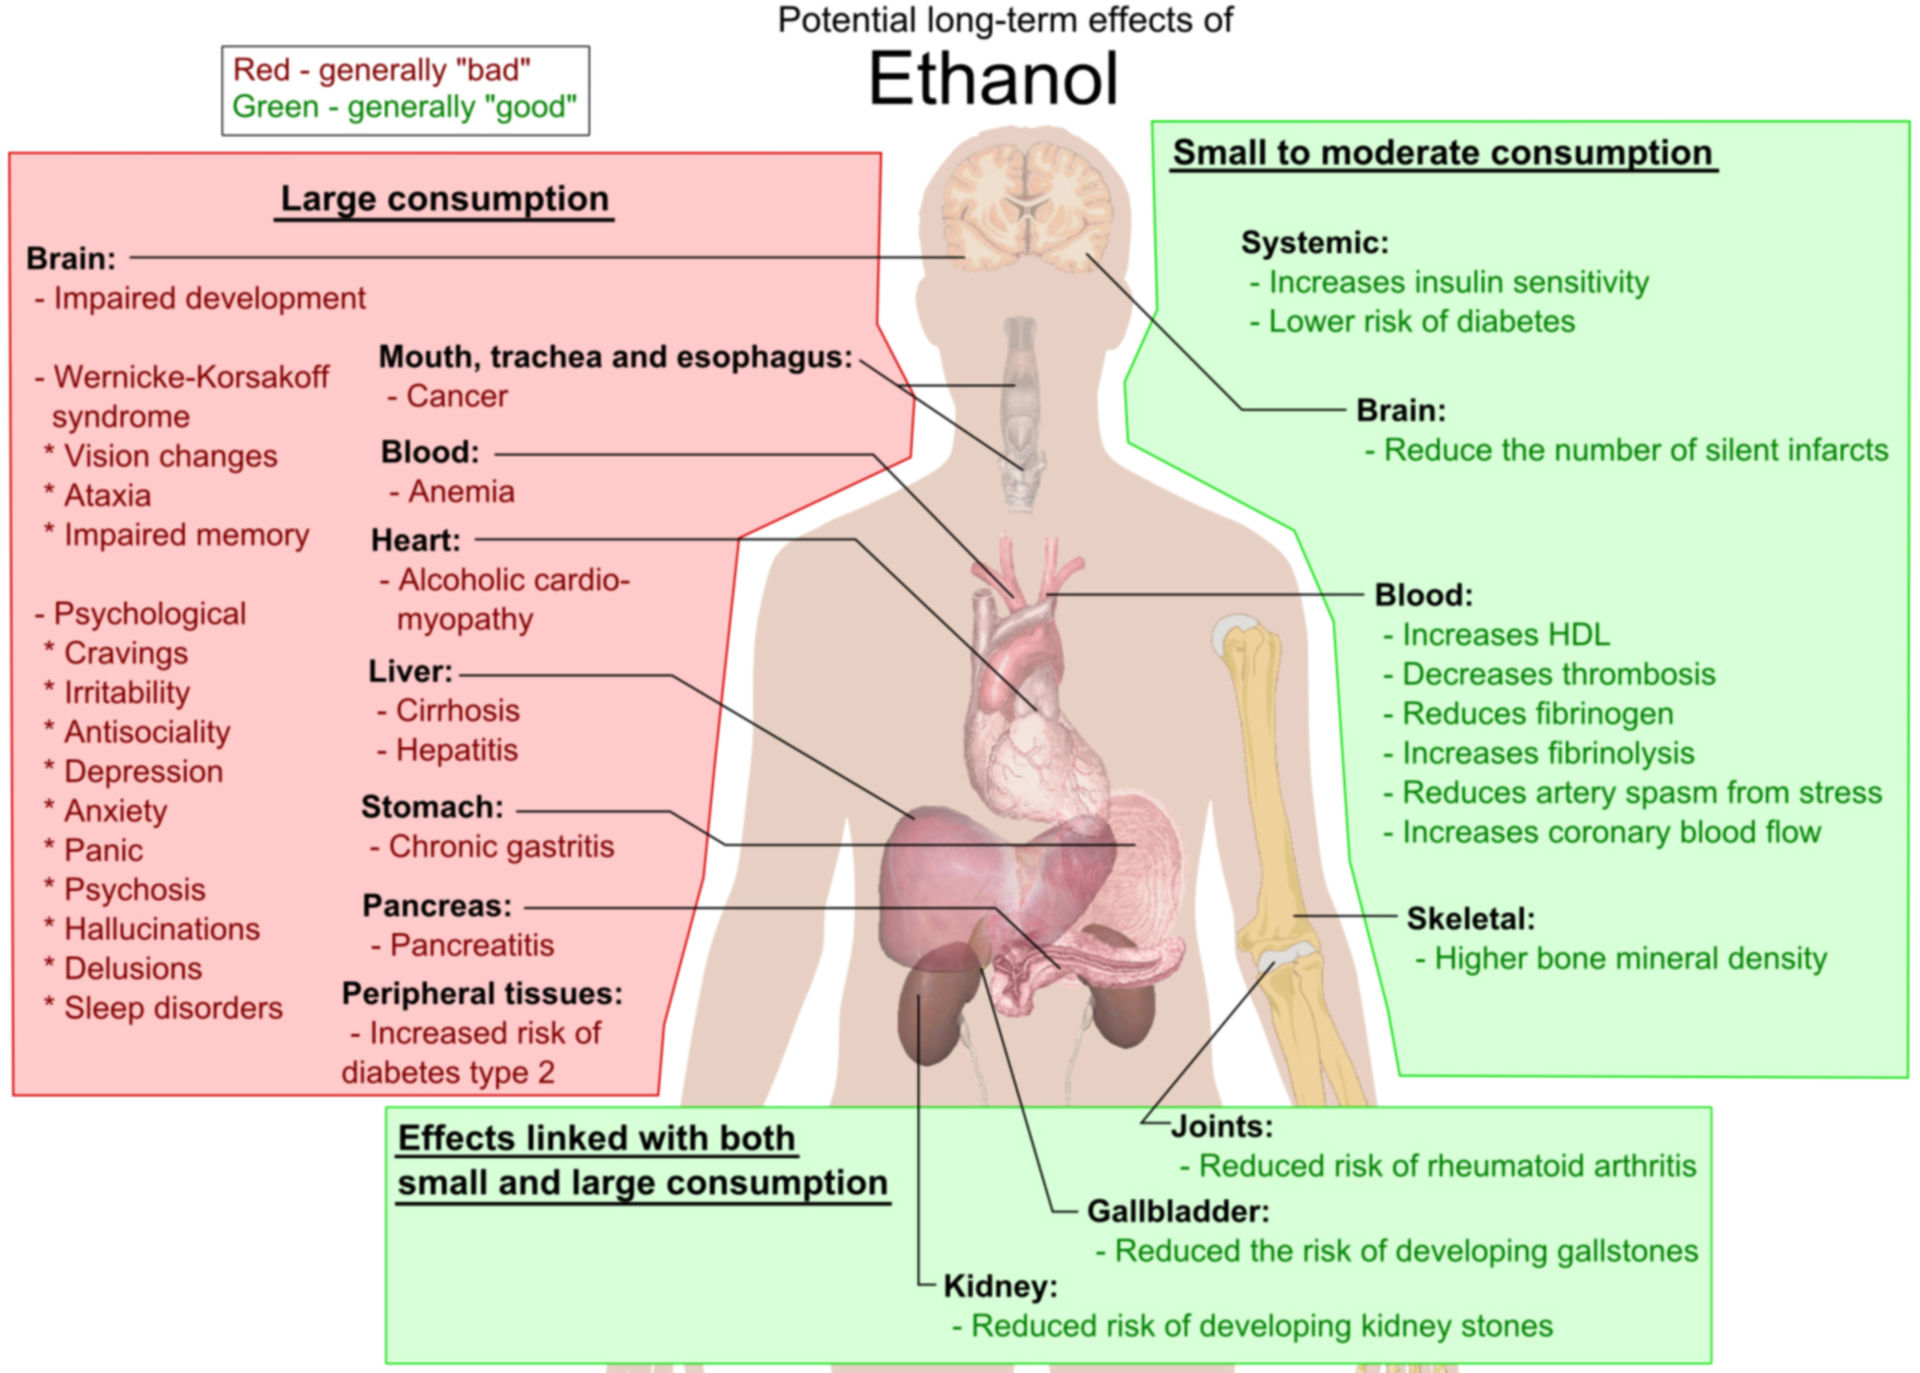 Potential long-term effects of Ethanol